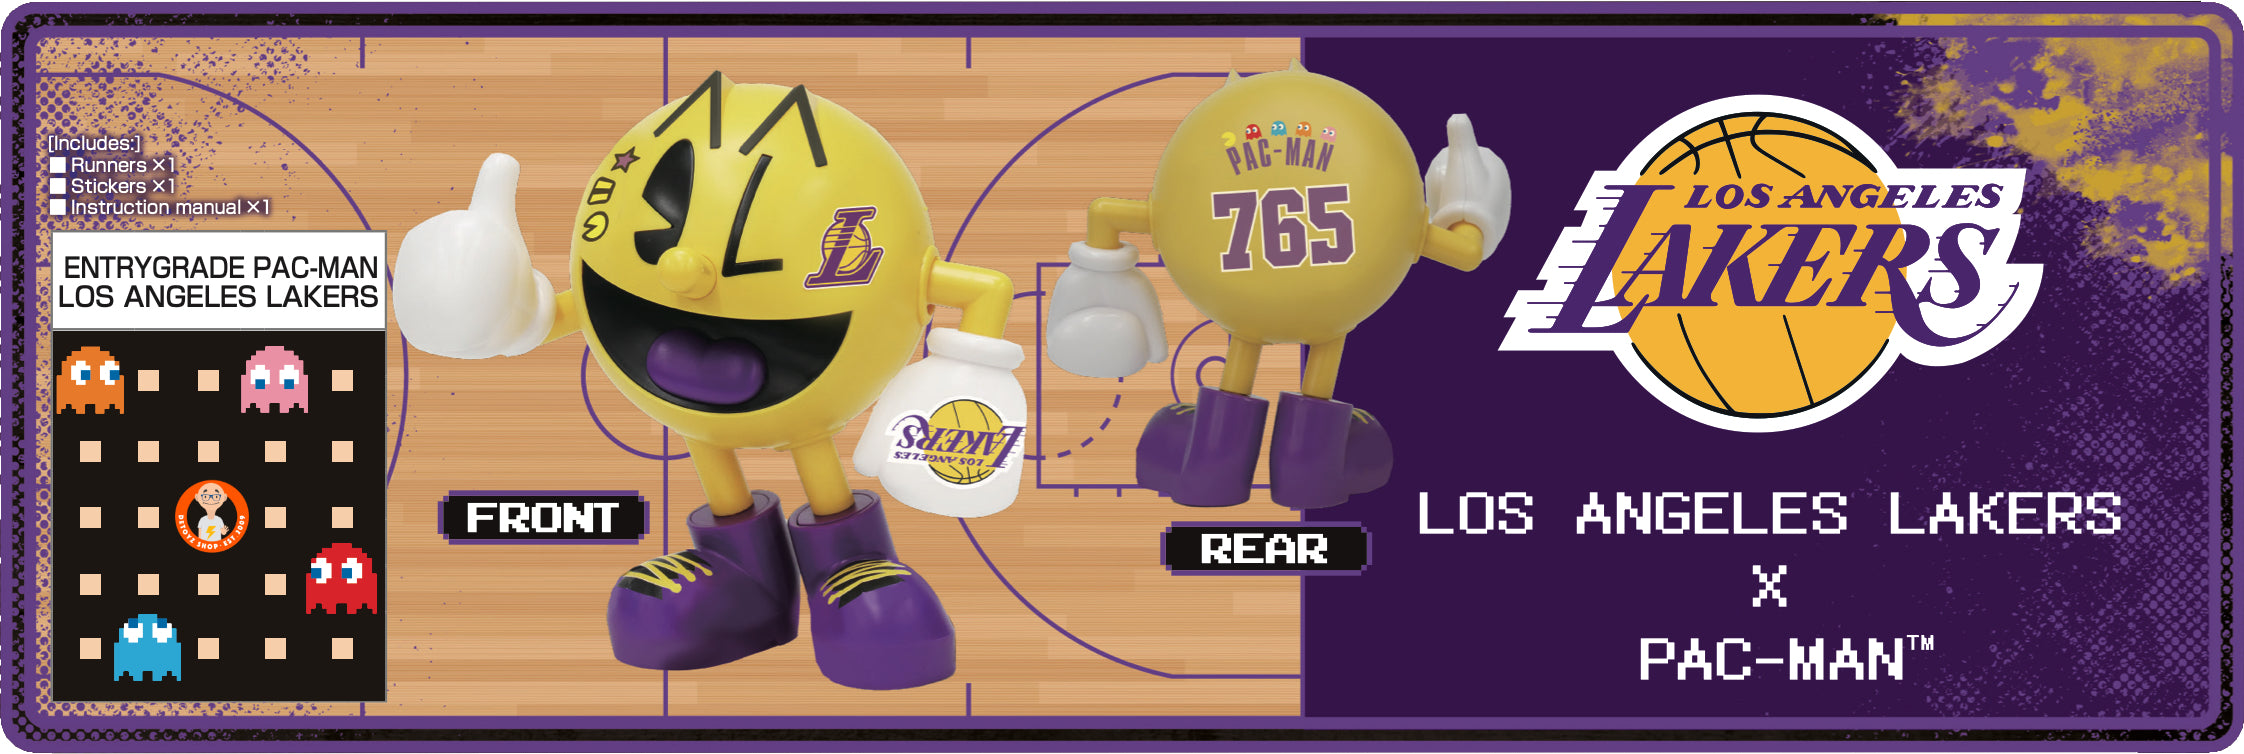 Entry Grade PAC-MAN Los Angeles Lakers